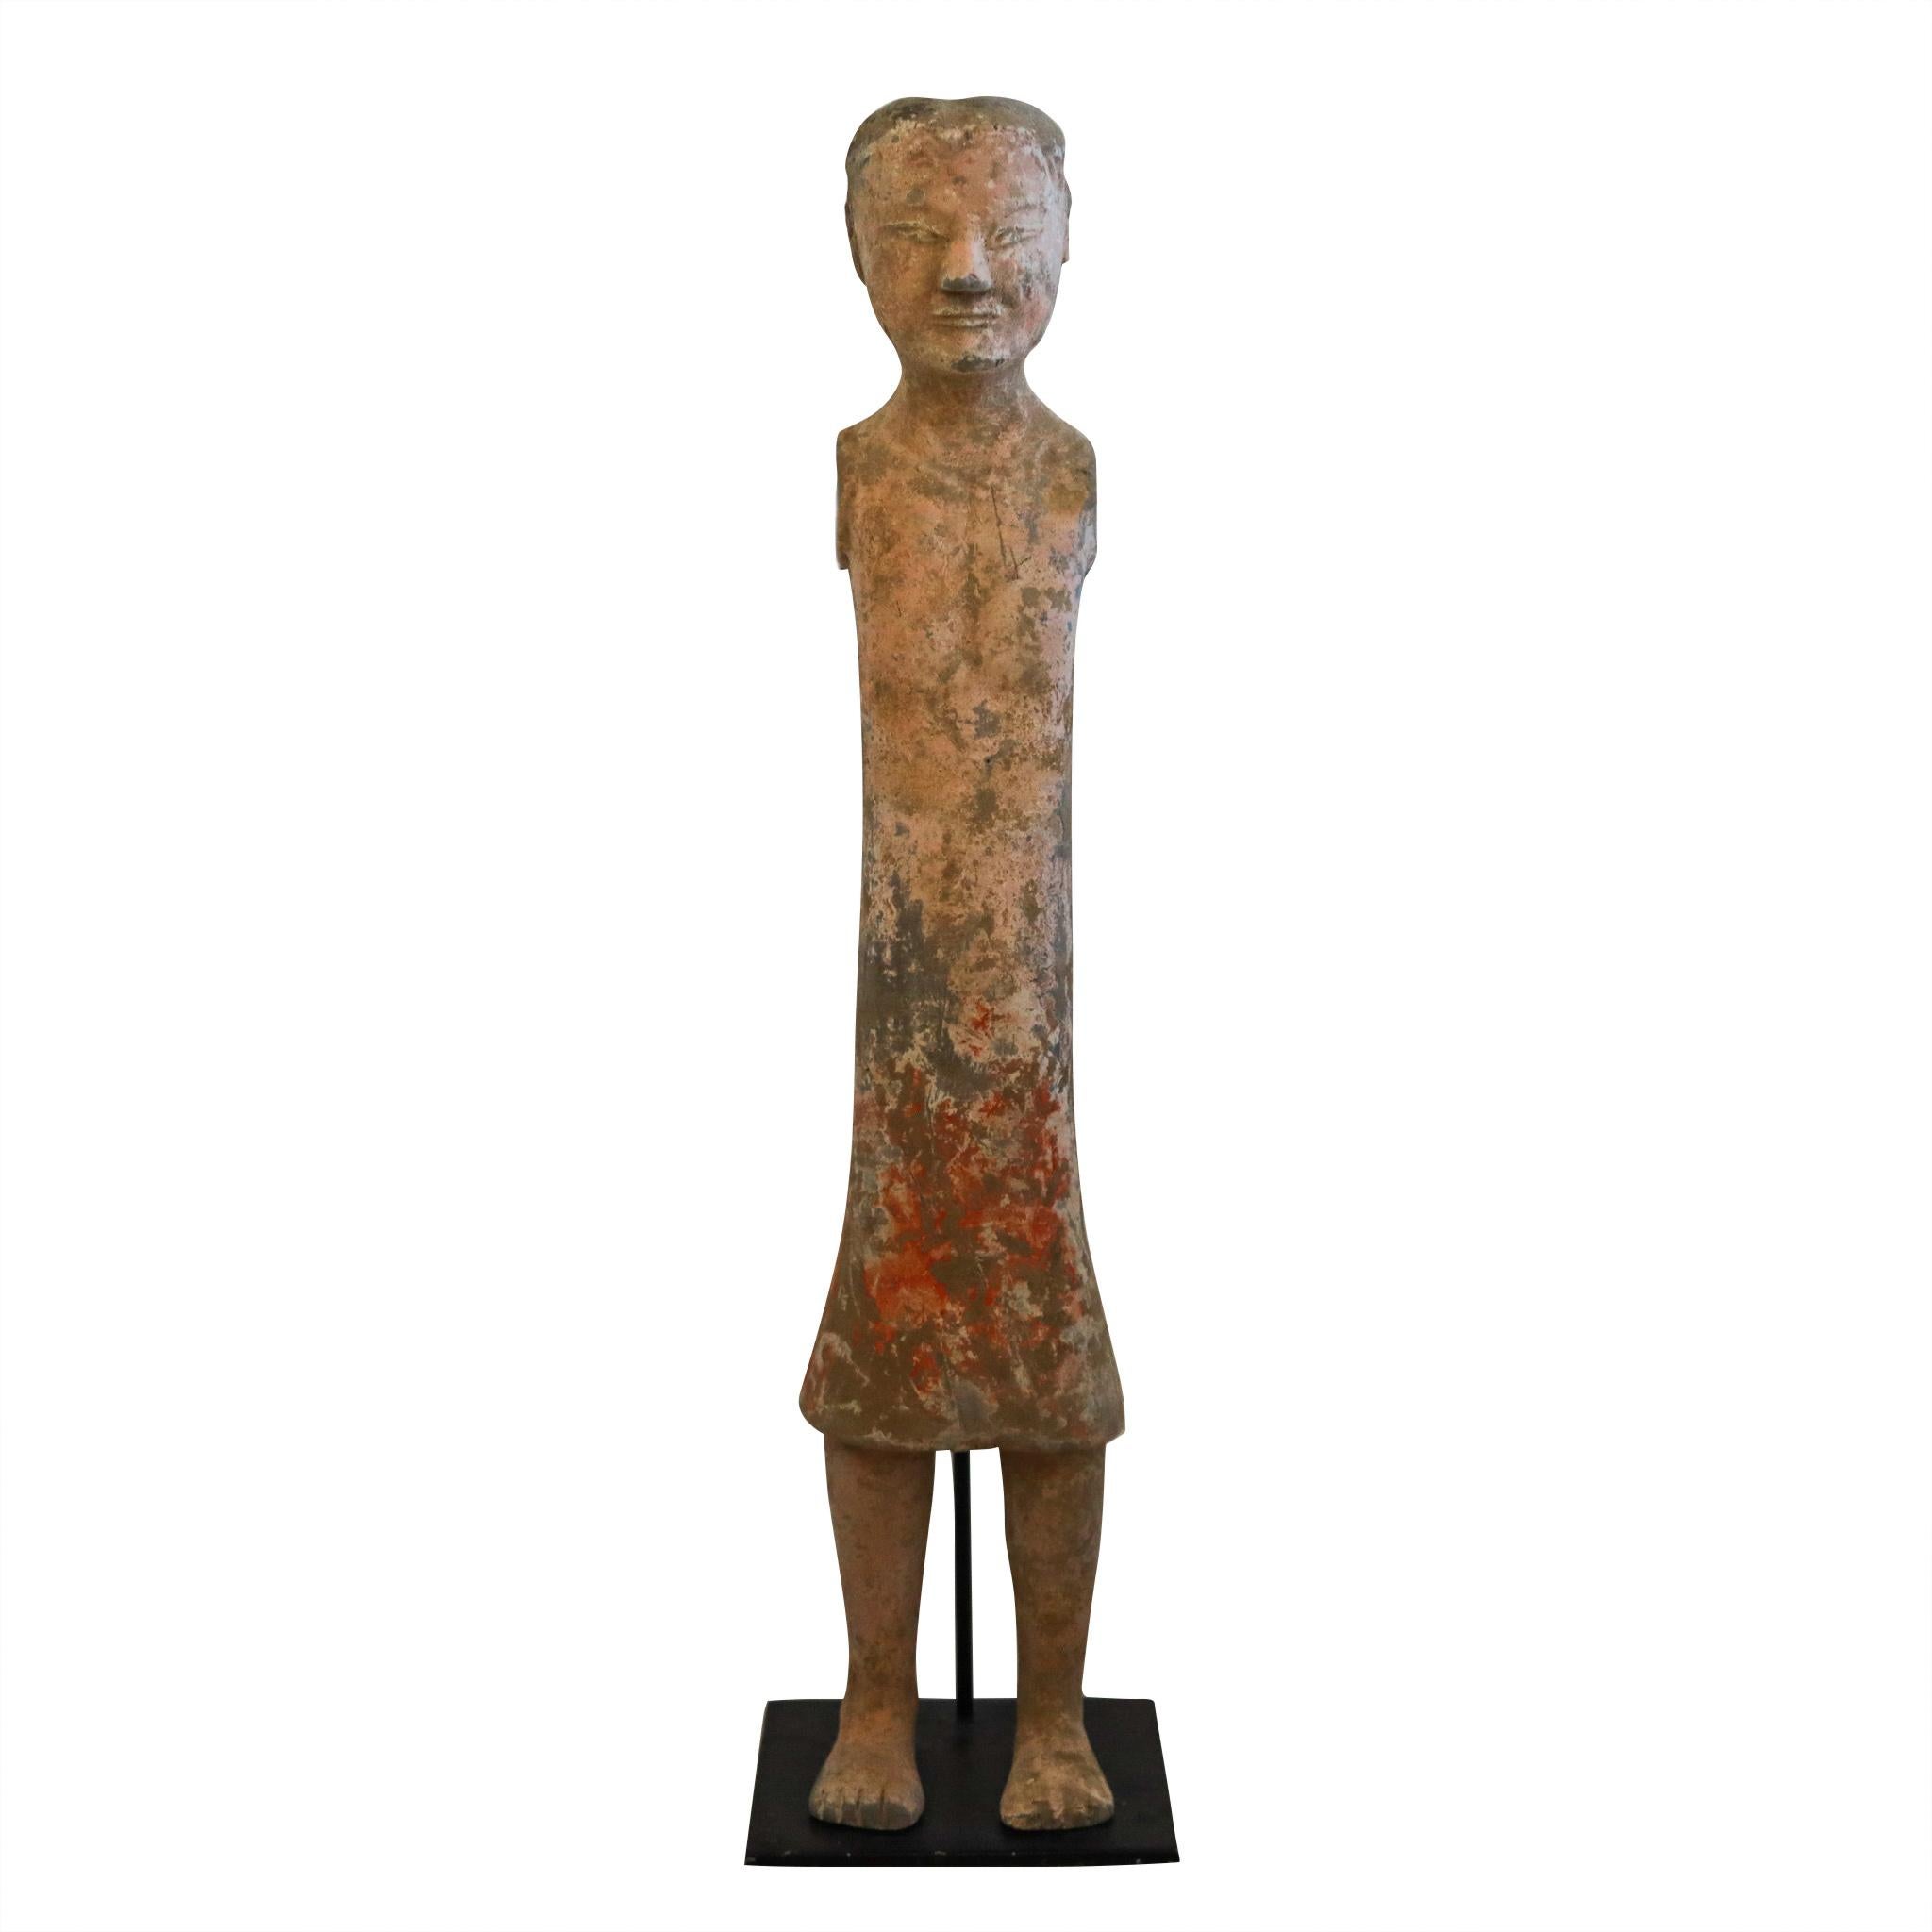 Standing Stickman from the Han Dynasty.

Original ancient Chinese tomb attendants sculpture of a tall, thin standing man wearing a short tunic. Beautifully crafted in grey earthenware terracotta around the 100 BC, during the Han dynasty period